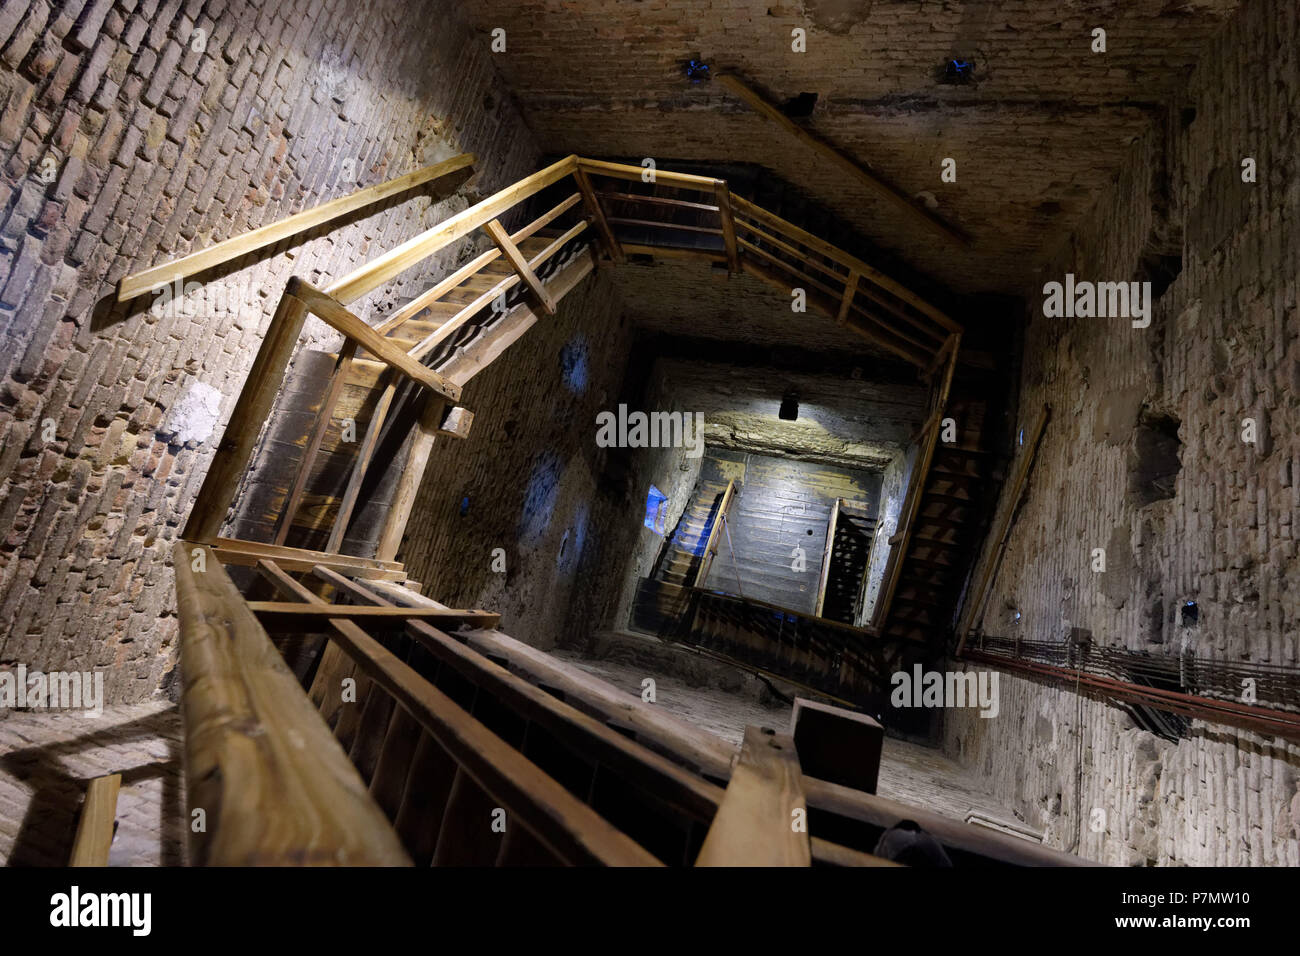 Italy, Emilia Romagna, Bologna, the Asinelli tower (12th century) 97.2 meters high, interior staircase Stock Photo